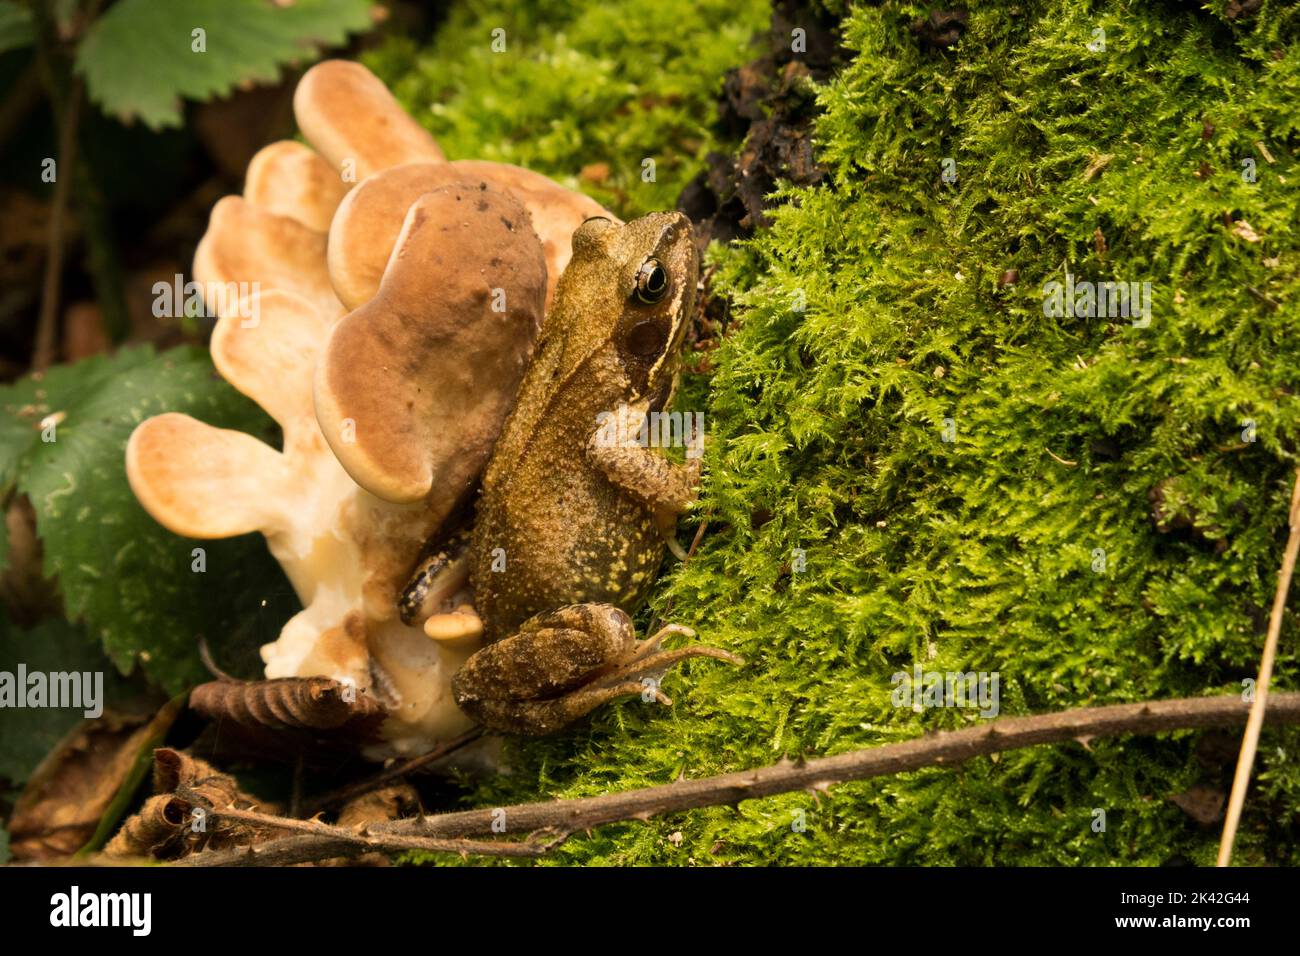 Frog with fungus Stock Photo